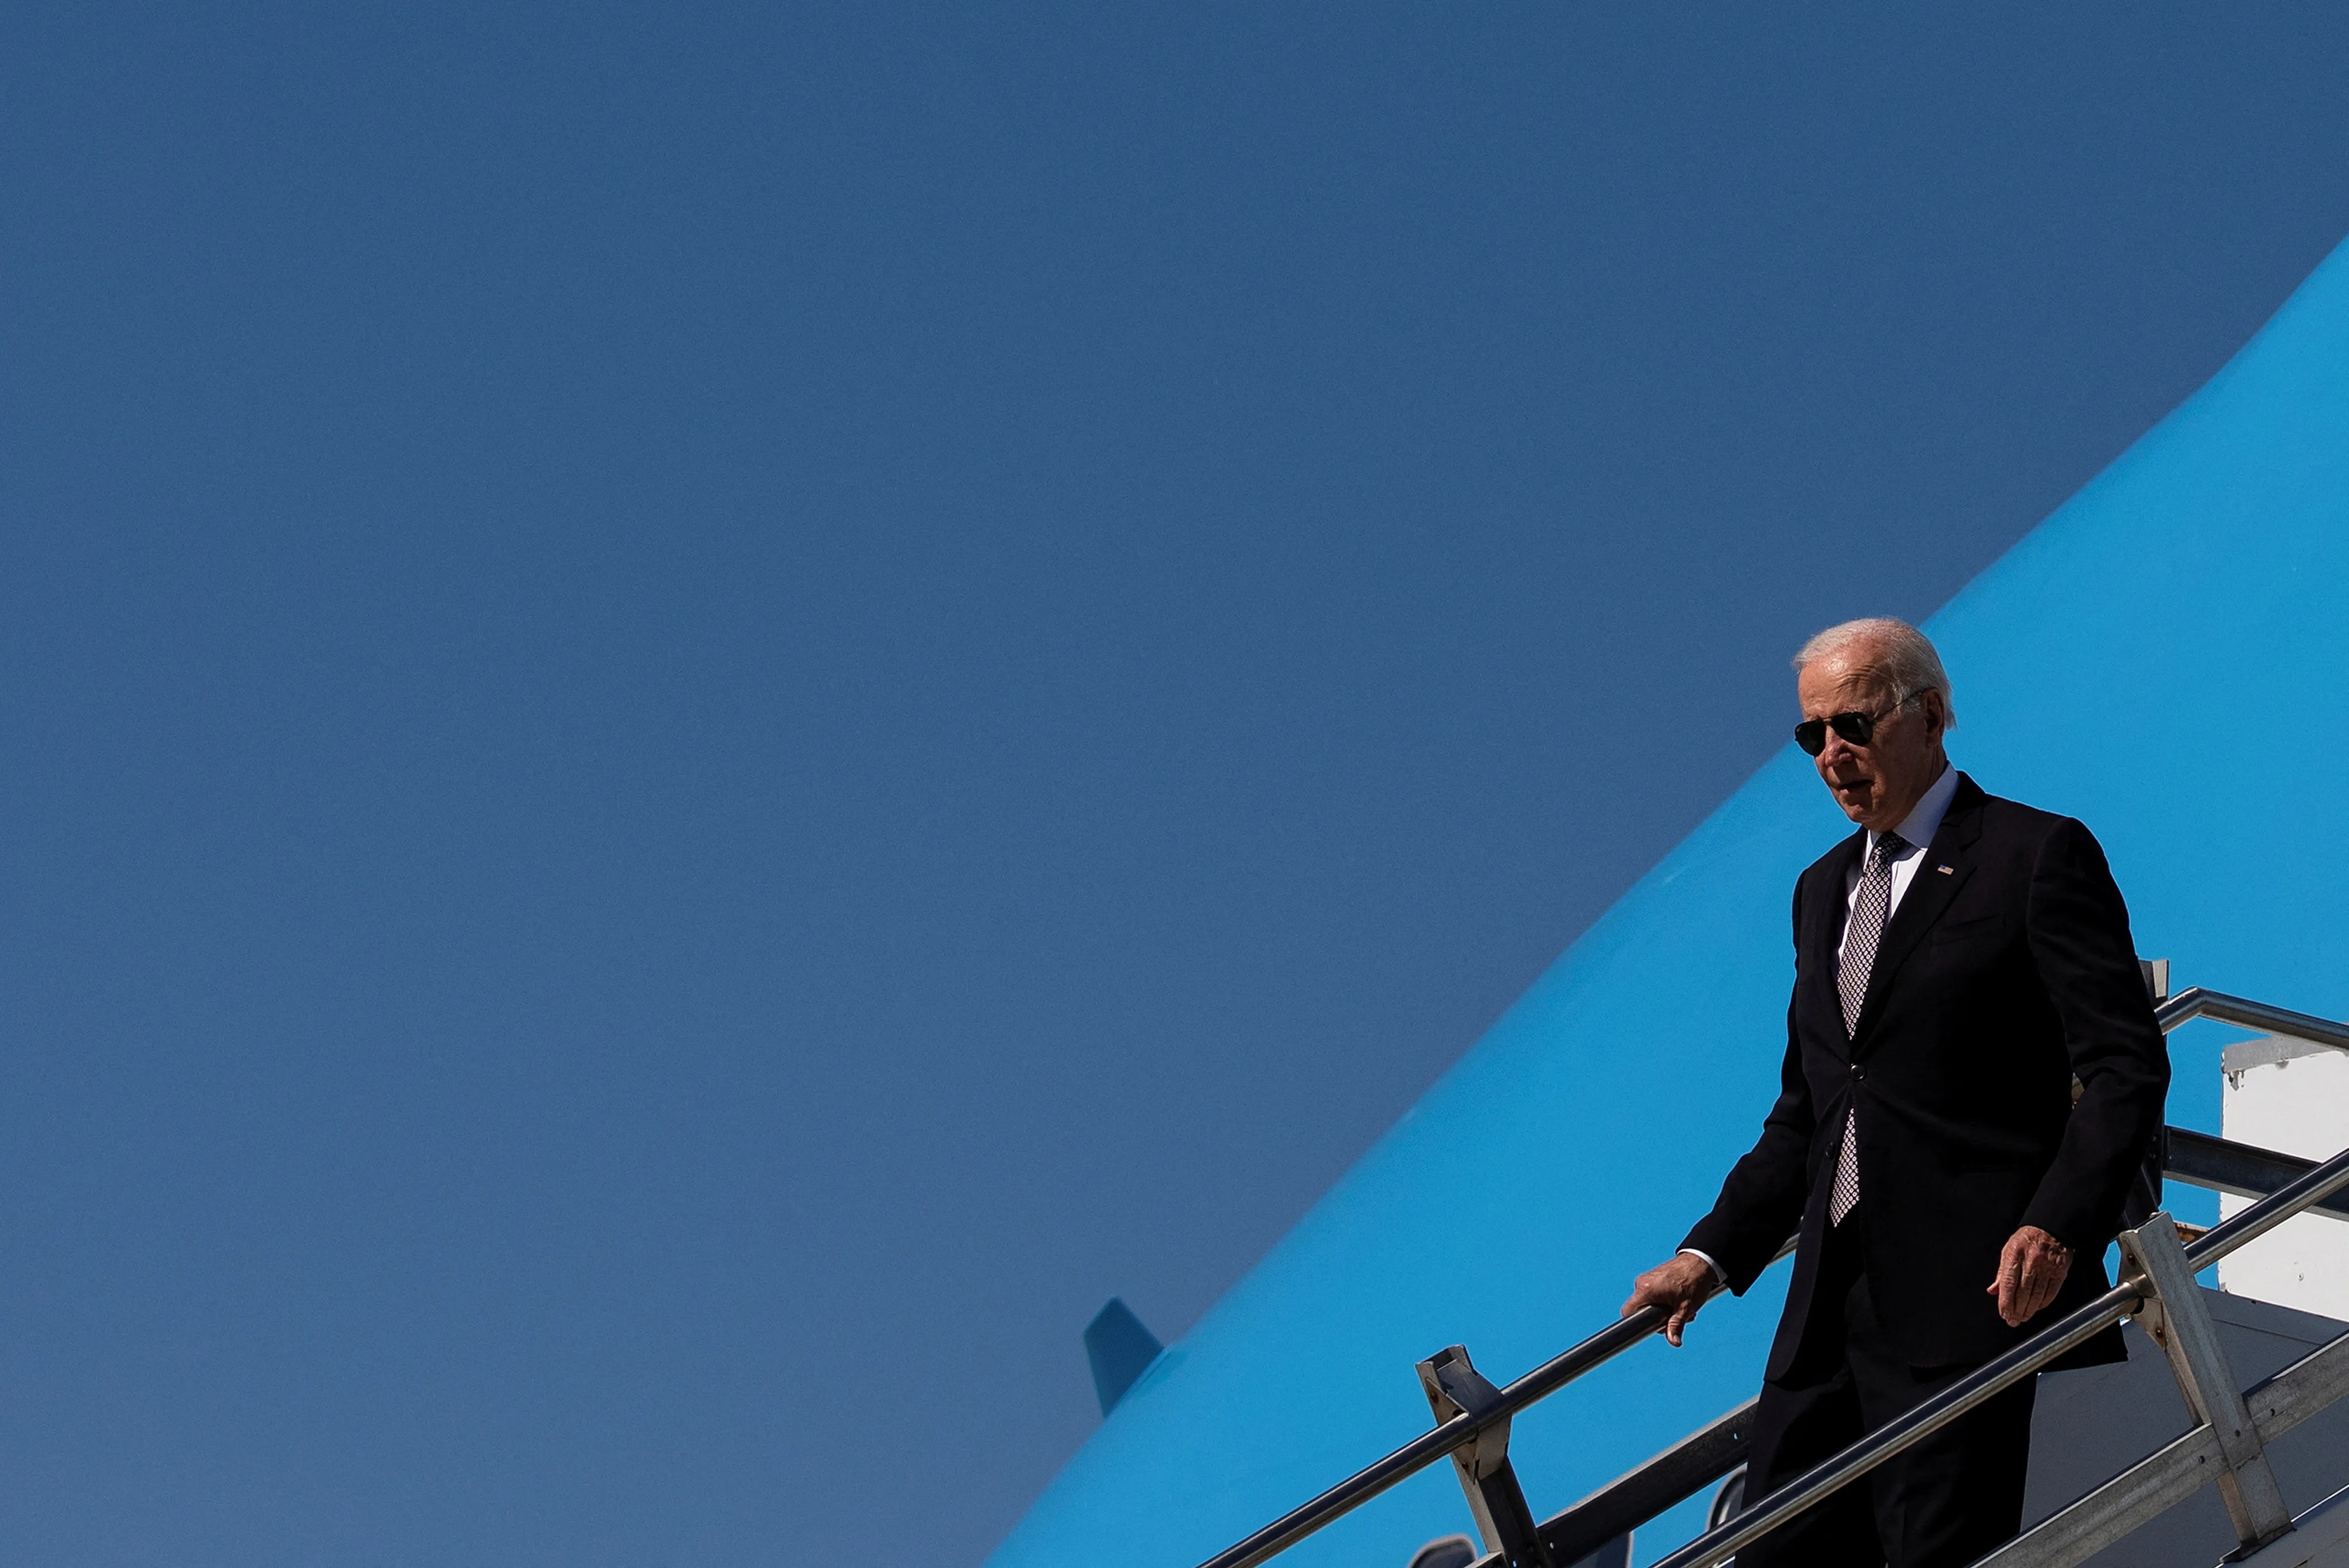 U.S. President Joe Biden descends from Air Force One at Stewart Air National Guard Base in Newburgh, New York, U.S., October 6, 2022. REUTERS/Tom Brenner REFILE- CORRECTING TOWN